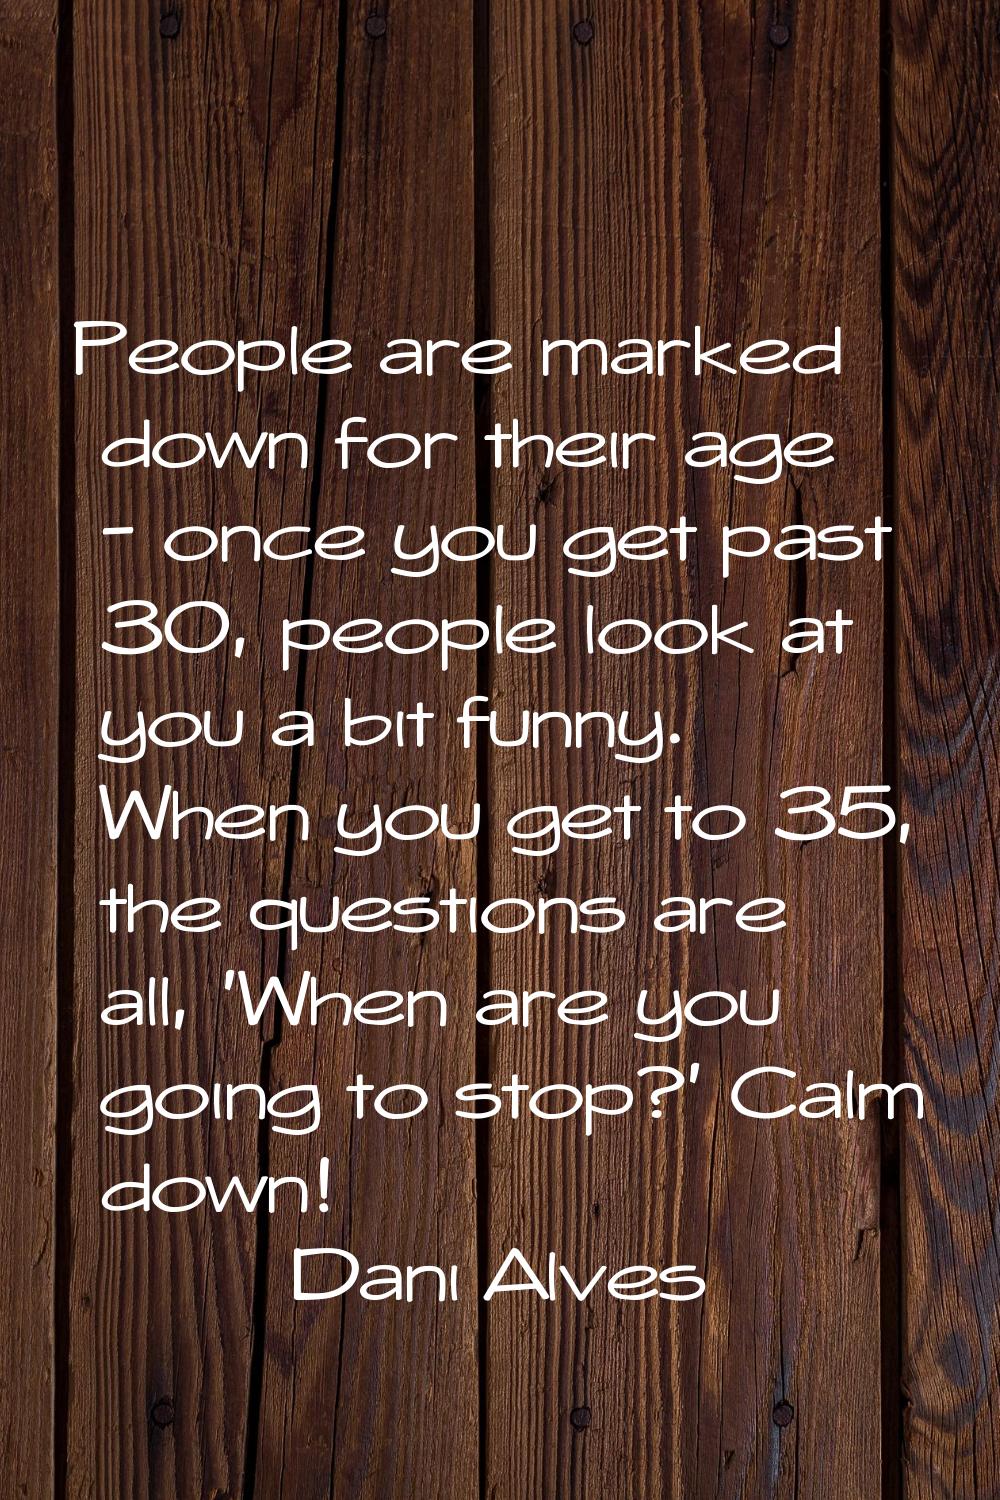 People are marked down for their age - once you get past 30, people look at you a bit funny. When y